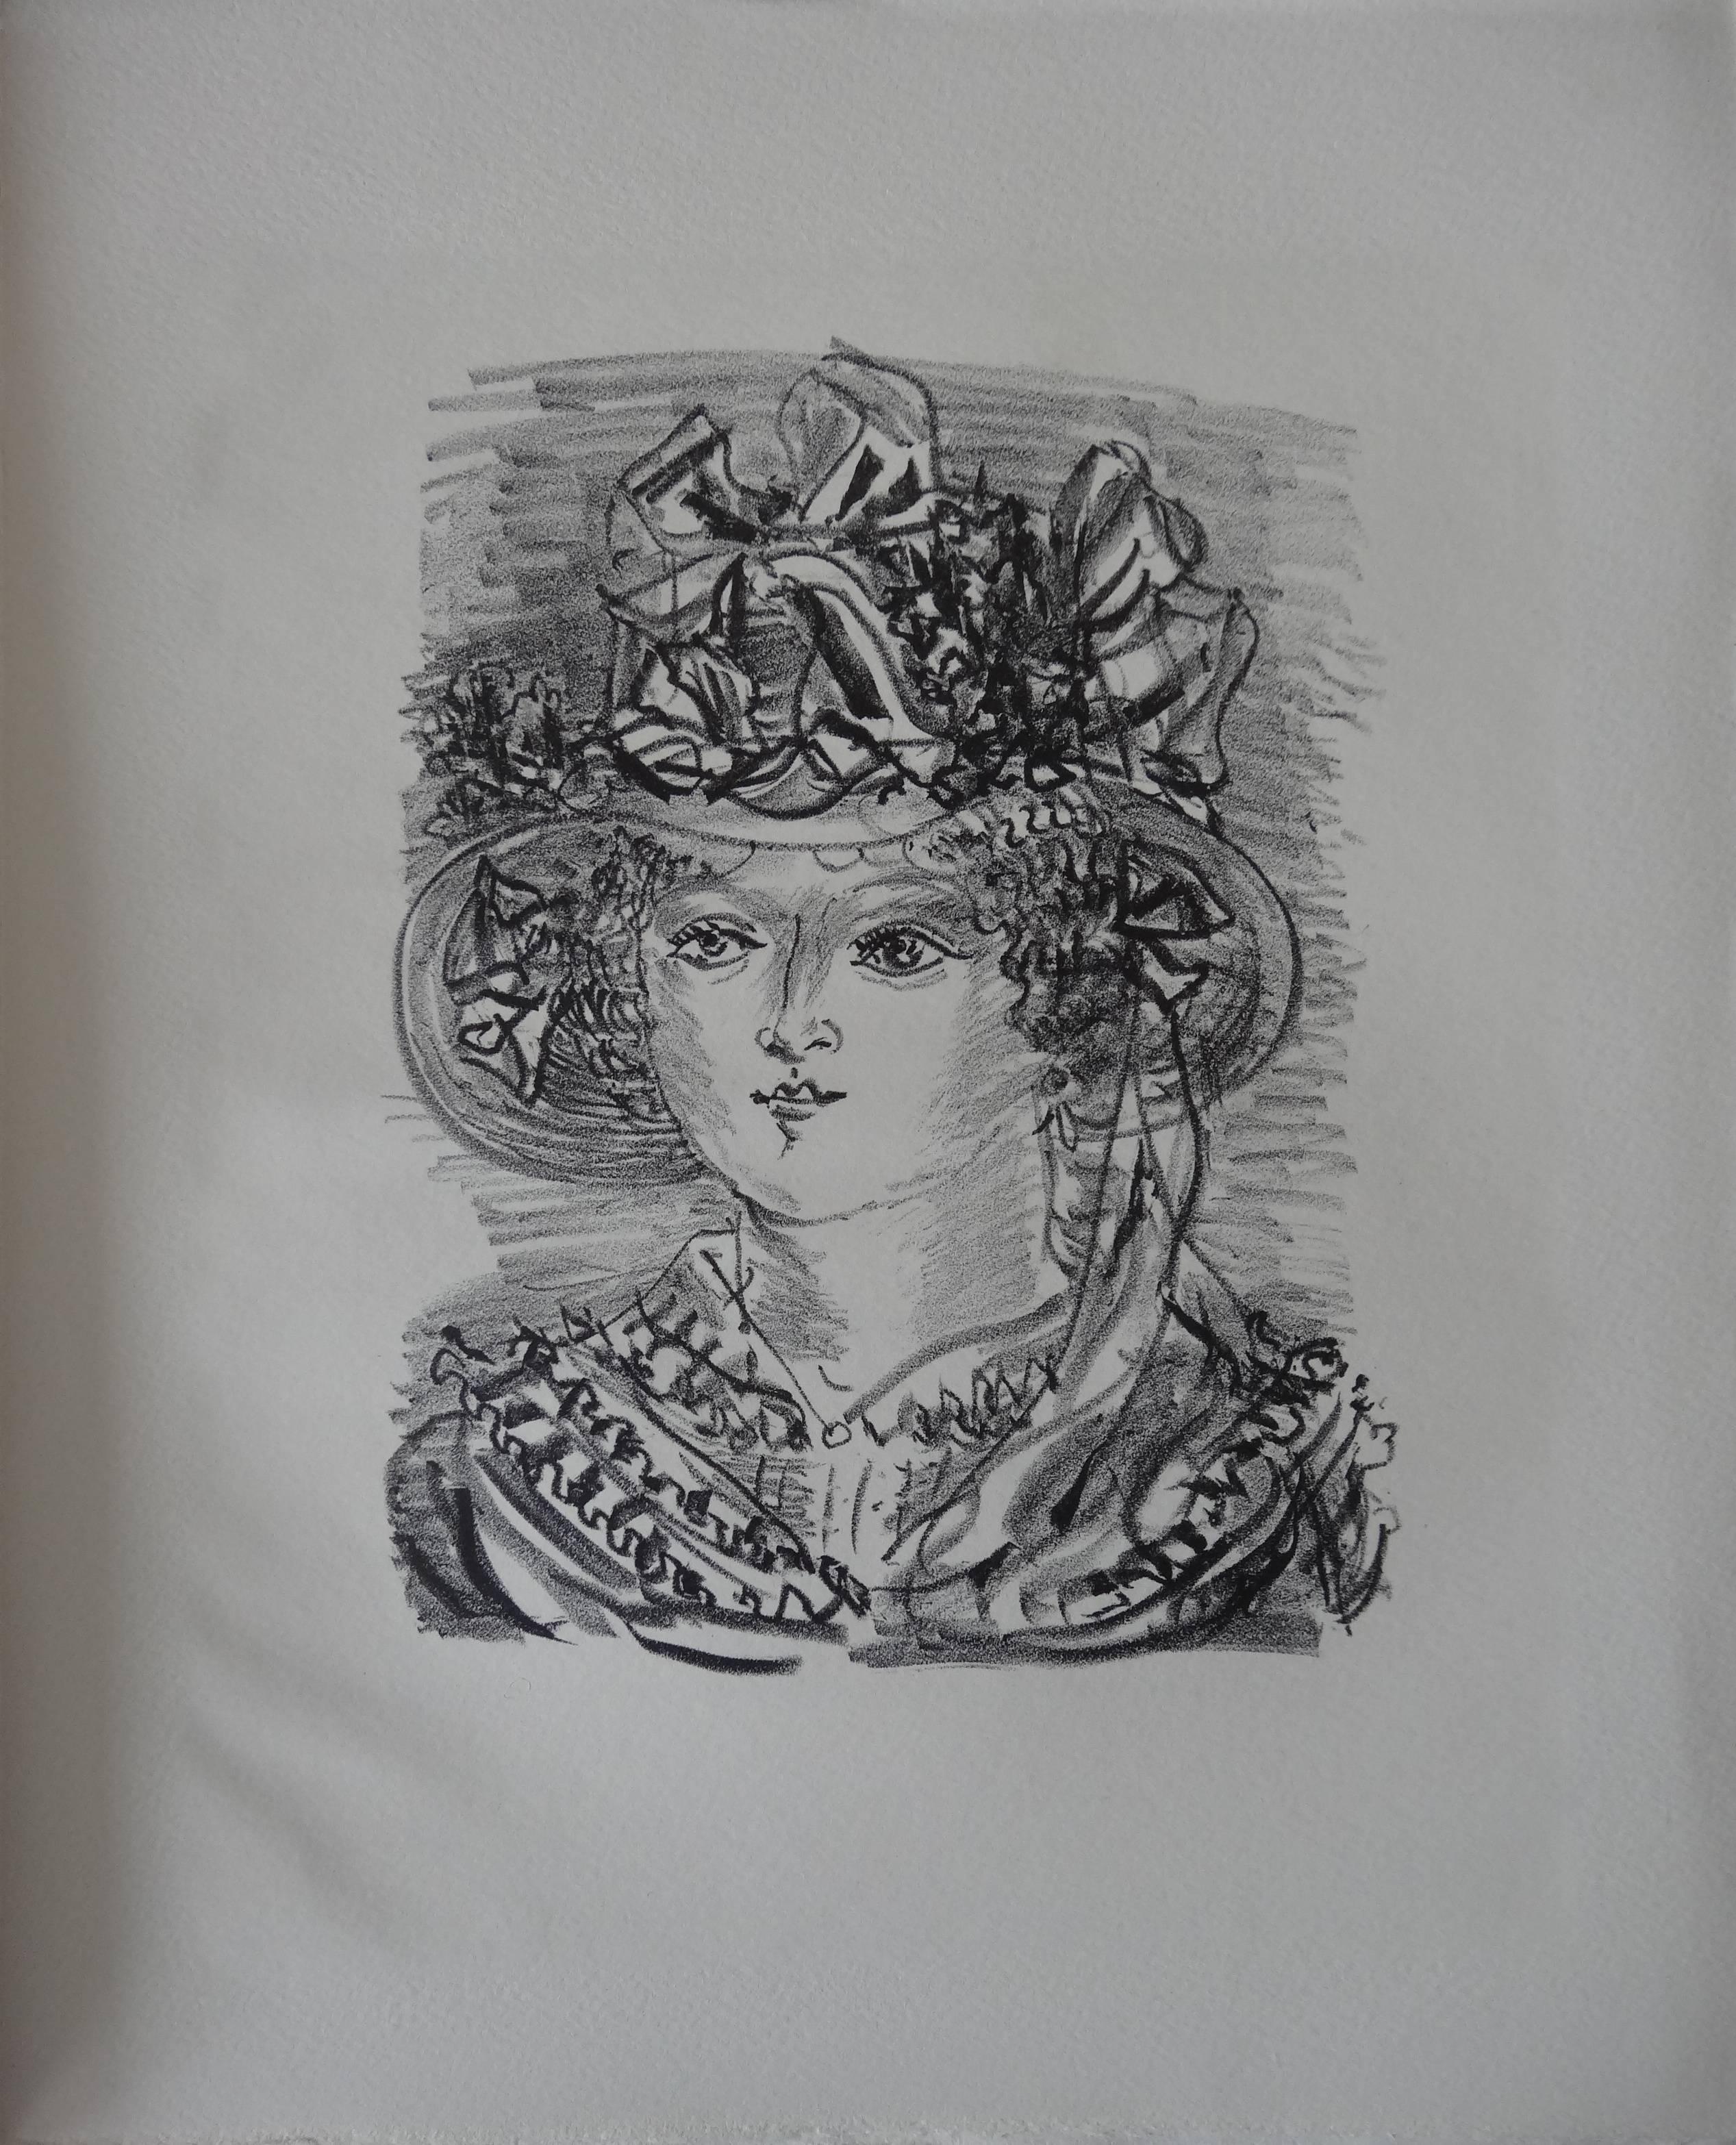 Woman with Funny Hat - Stone lithograph, 1930 - Print by Raoul Dufy